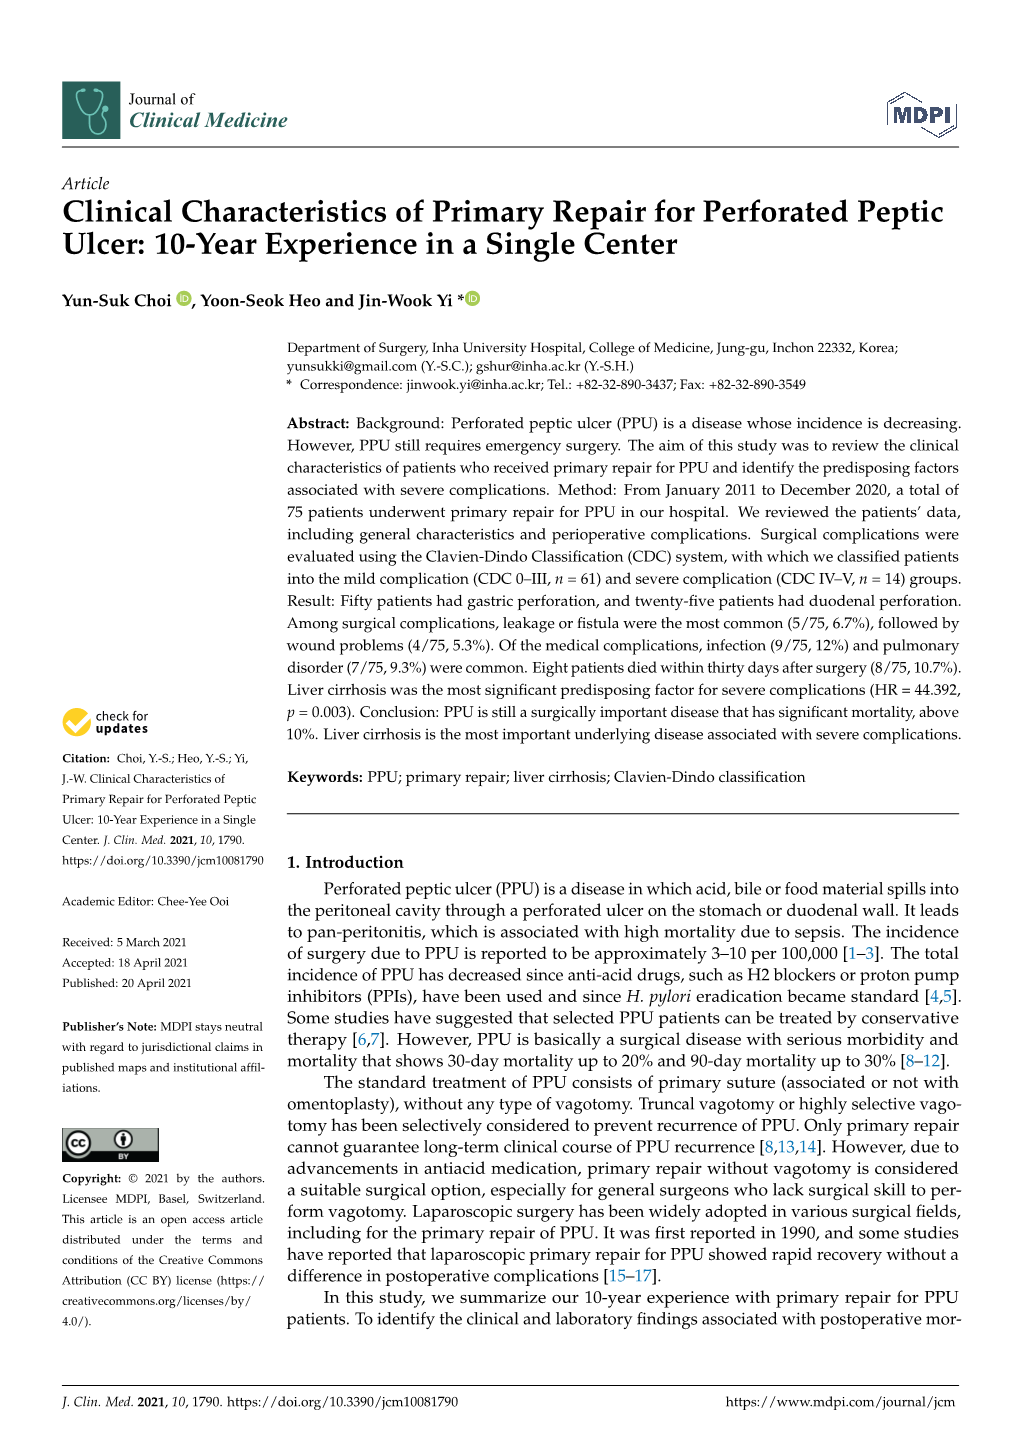 Clinical Characteristics of Primary Repair for Perforated Peptic Ulcer: 10-Year Experience in a Single Center